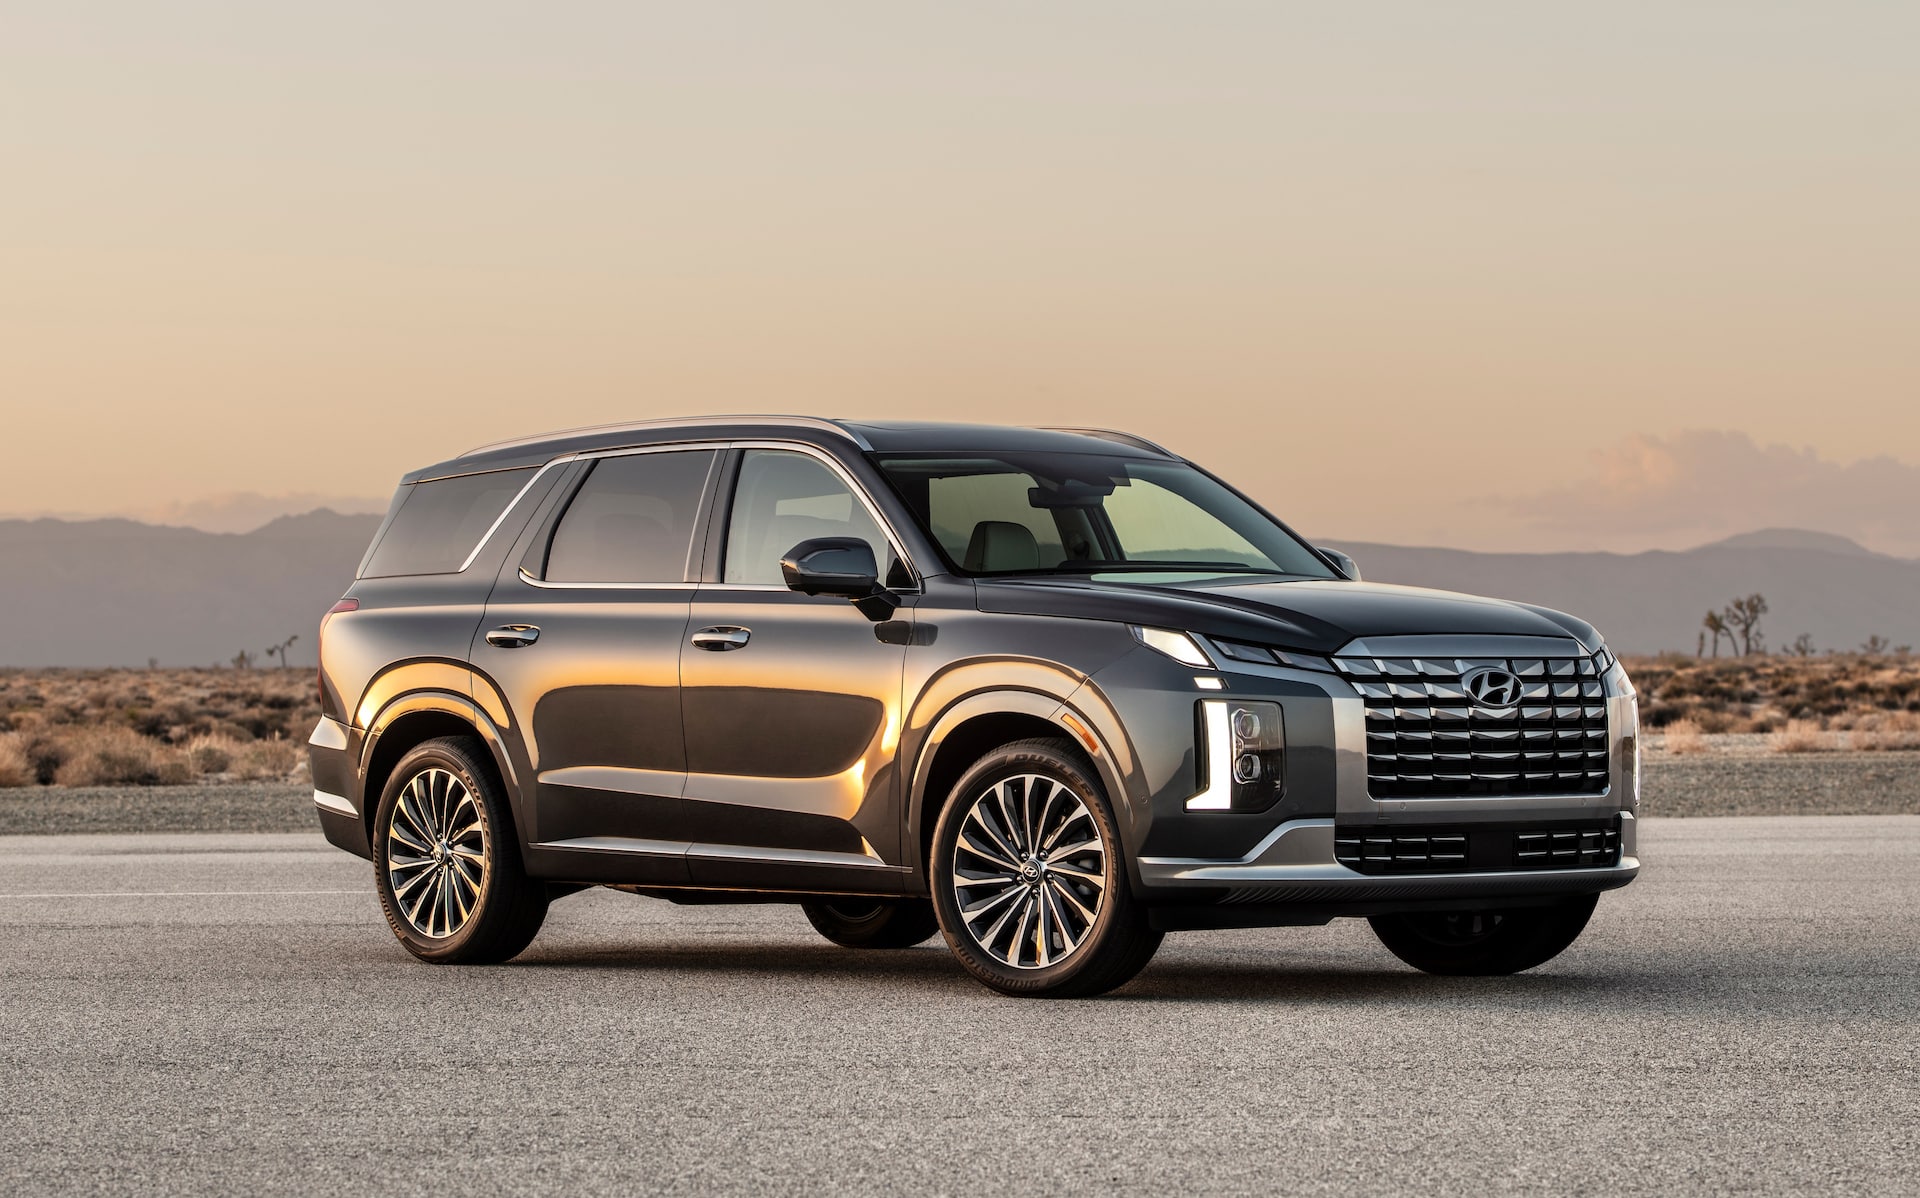 Certain 2023 Hyundai Palisade SUVs are being recalled for brake-assist issue